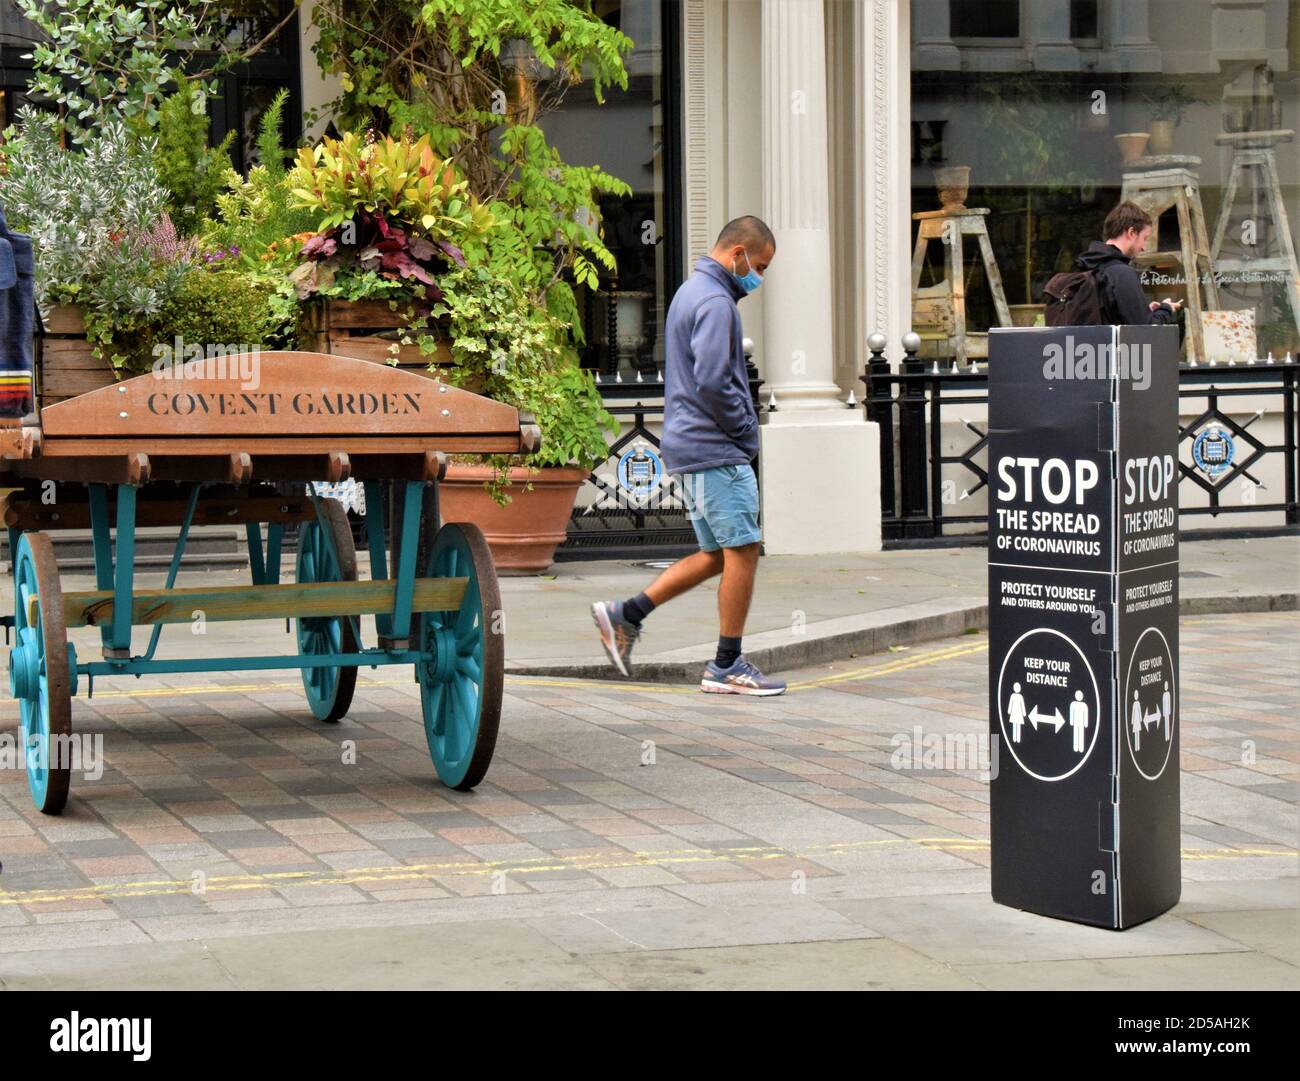 A man with a protective face mask walks past a Stop The Spread Of Coronavirus social distancing street sign in Covent Garden, London Stock Photo